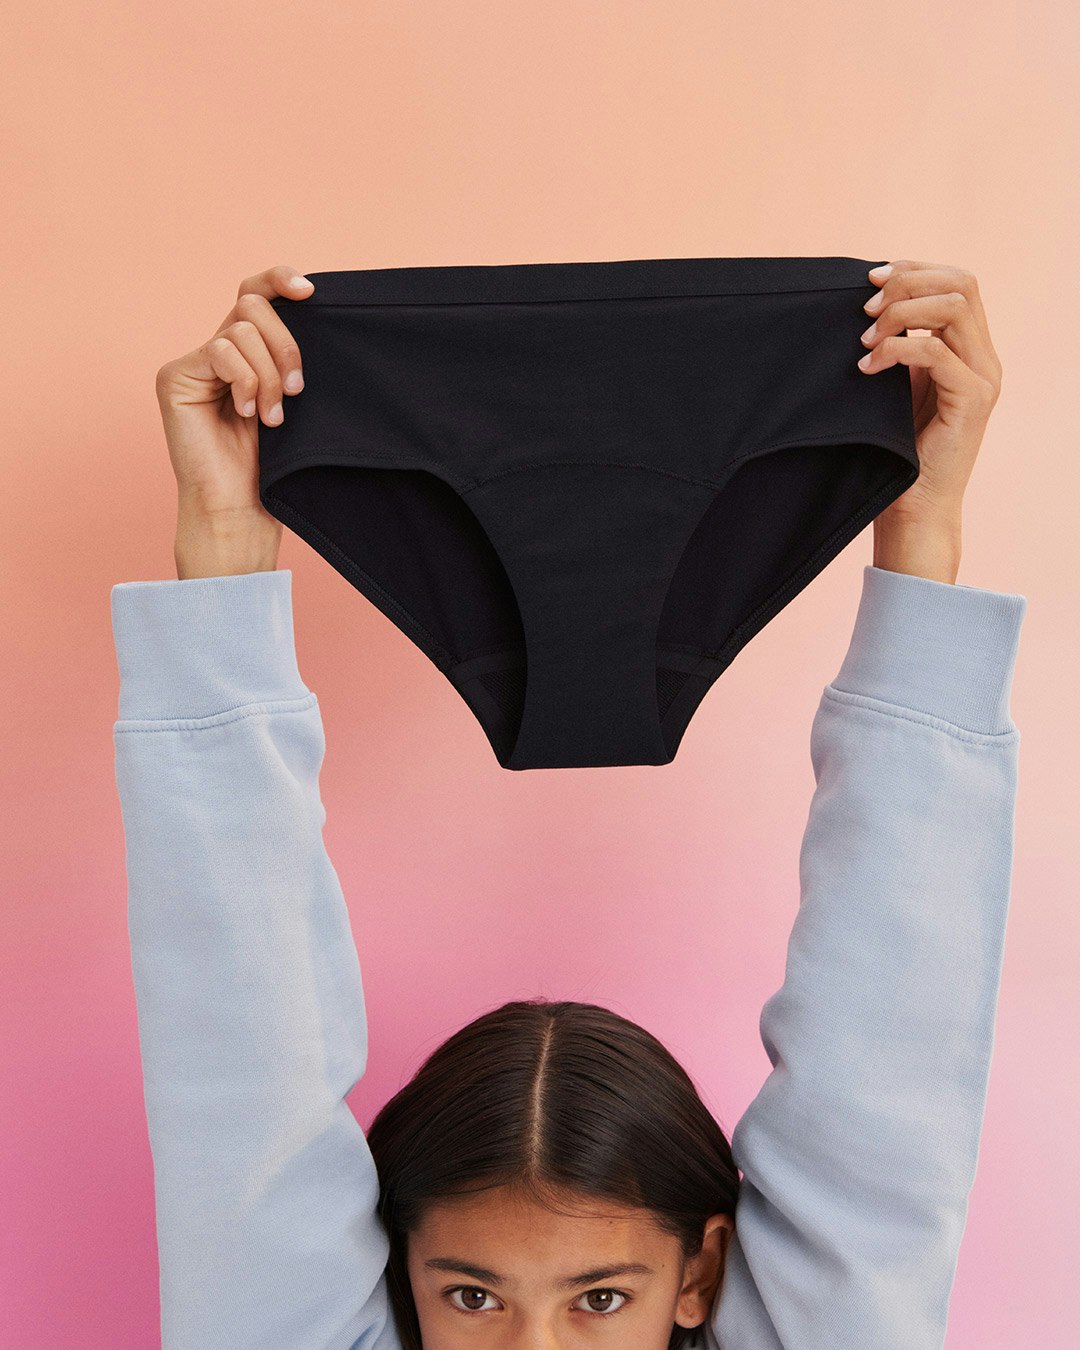 Period Underwear for Teens from Female Engineering